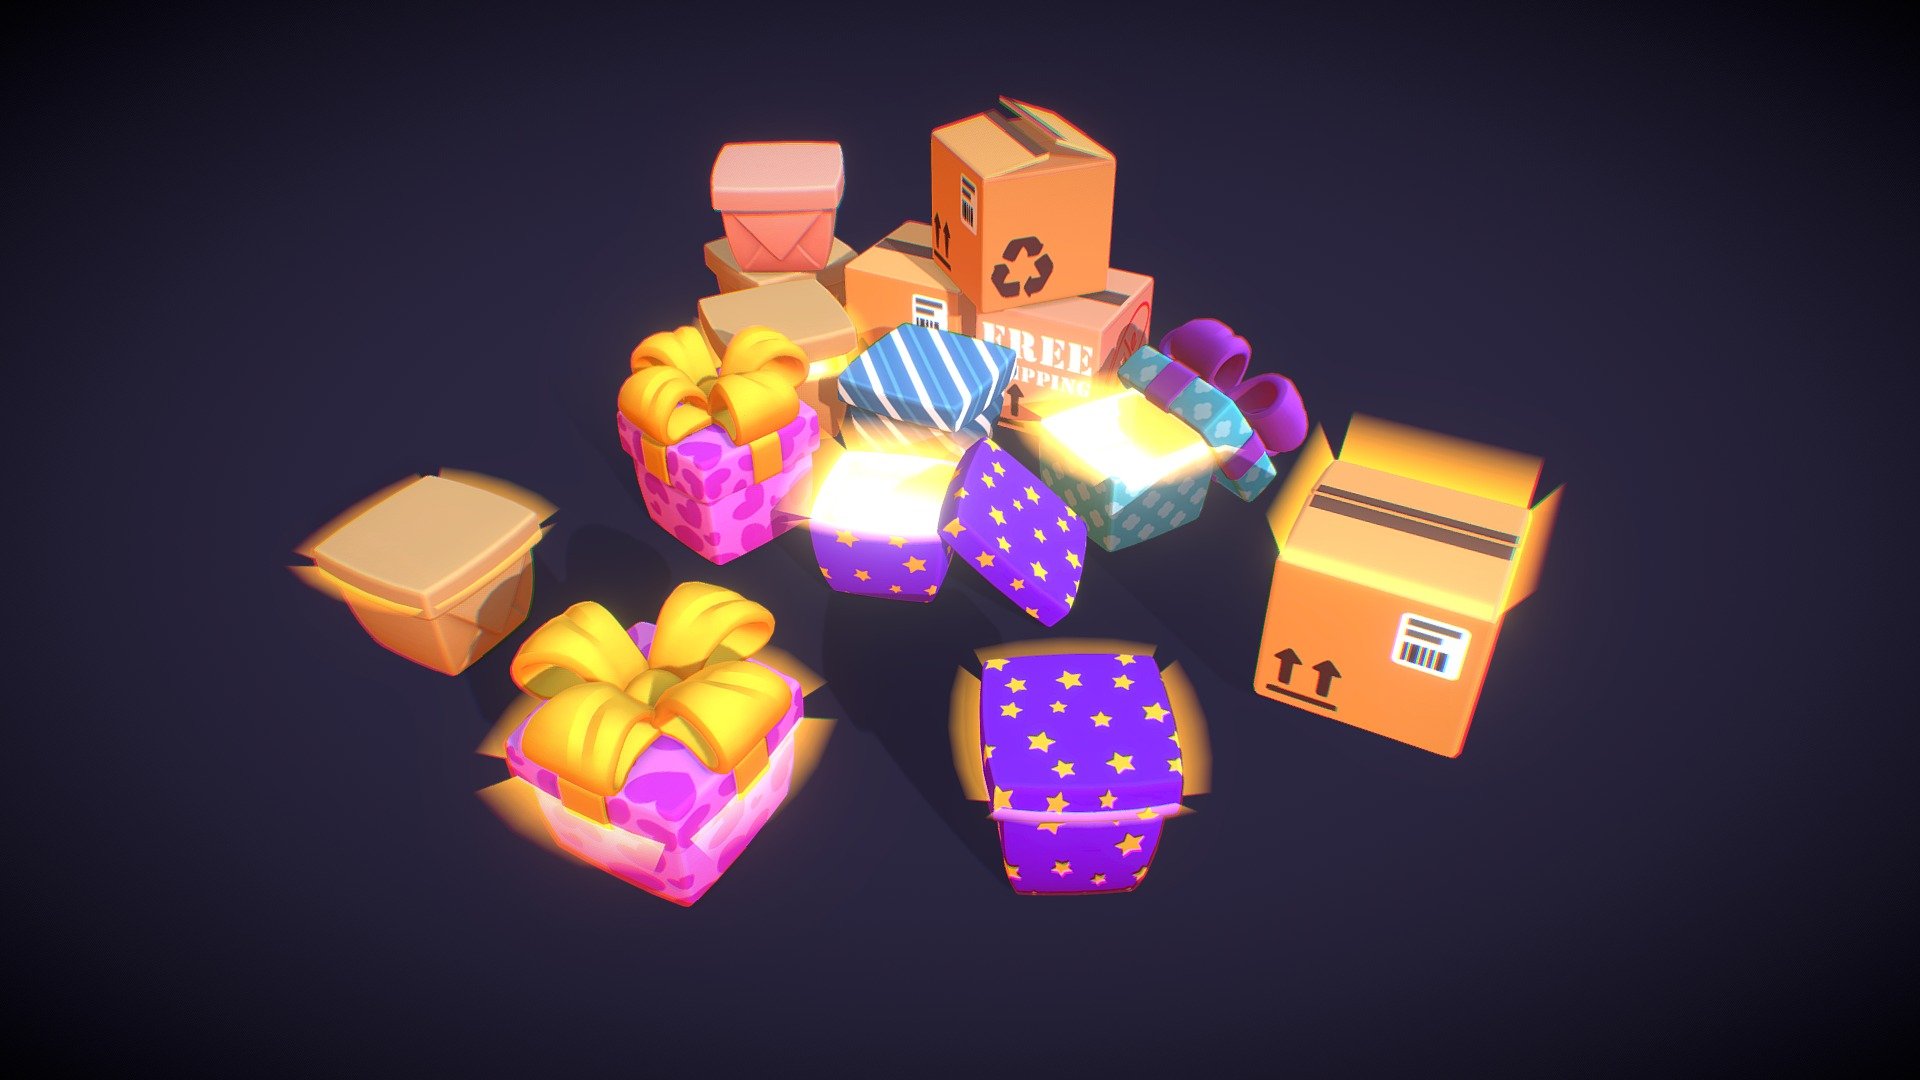 This package includes 4 different models of gift boxes and parcels, each of which is presented in 2 colors. And each model has 4 unique animations: Invoke, Idle, Unpack and Vanish.

For all 4 models, only 1 diffuse texture (2k) is used, so it is preferable to use some kind of stylized shader that has flexible options for customizing the visual.

Also inside the pack you will find the corresponding glow meshes for each model, which will help you create a more interesting visual. Also, these meshes repeat all the animations of the main model.

In the archive you will find a Unity package as well as a Maya scene in the format .ma, as well as 2 diffuse textures (2k) for 2 color schemes.

More detailed information about the package can be found in the manual - Packages And Gifts - 3D model by RicochetWitcher 3d model